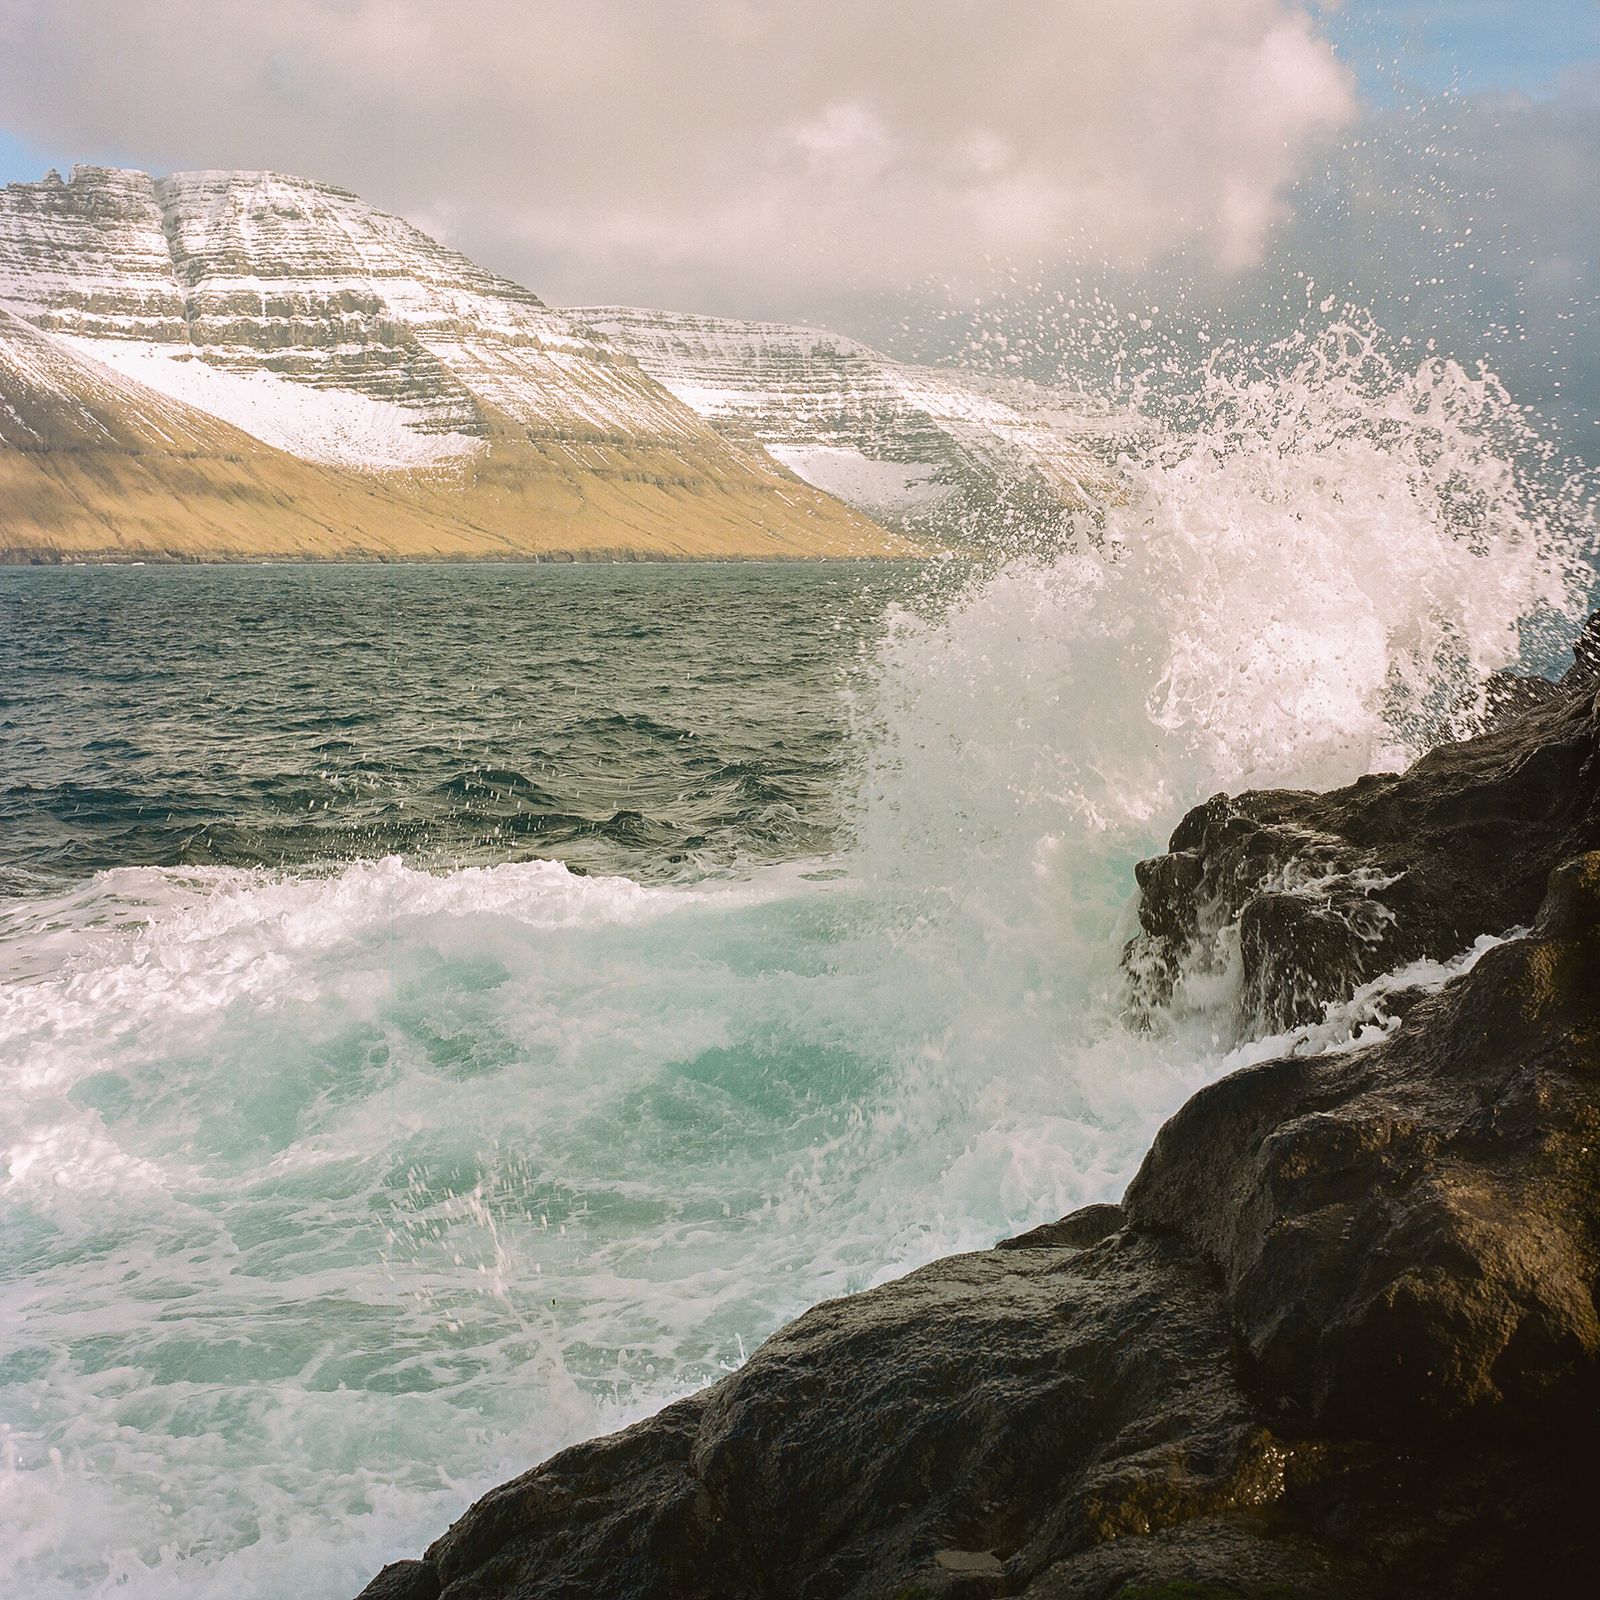 © Silvia Varela - A wave crashes on the rocks at the village of Mikladur, on the Faroese island of Kalsoy.